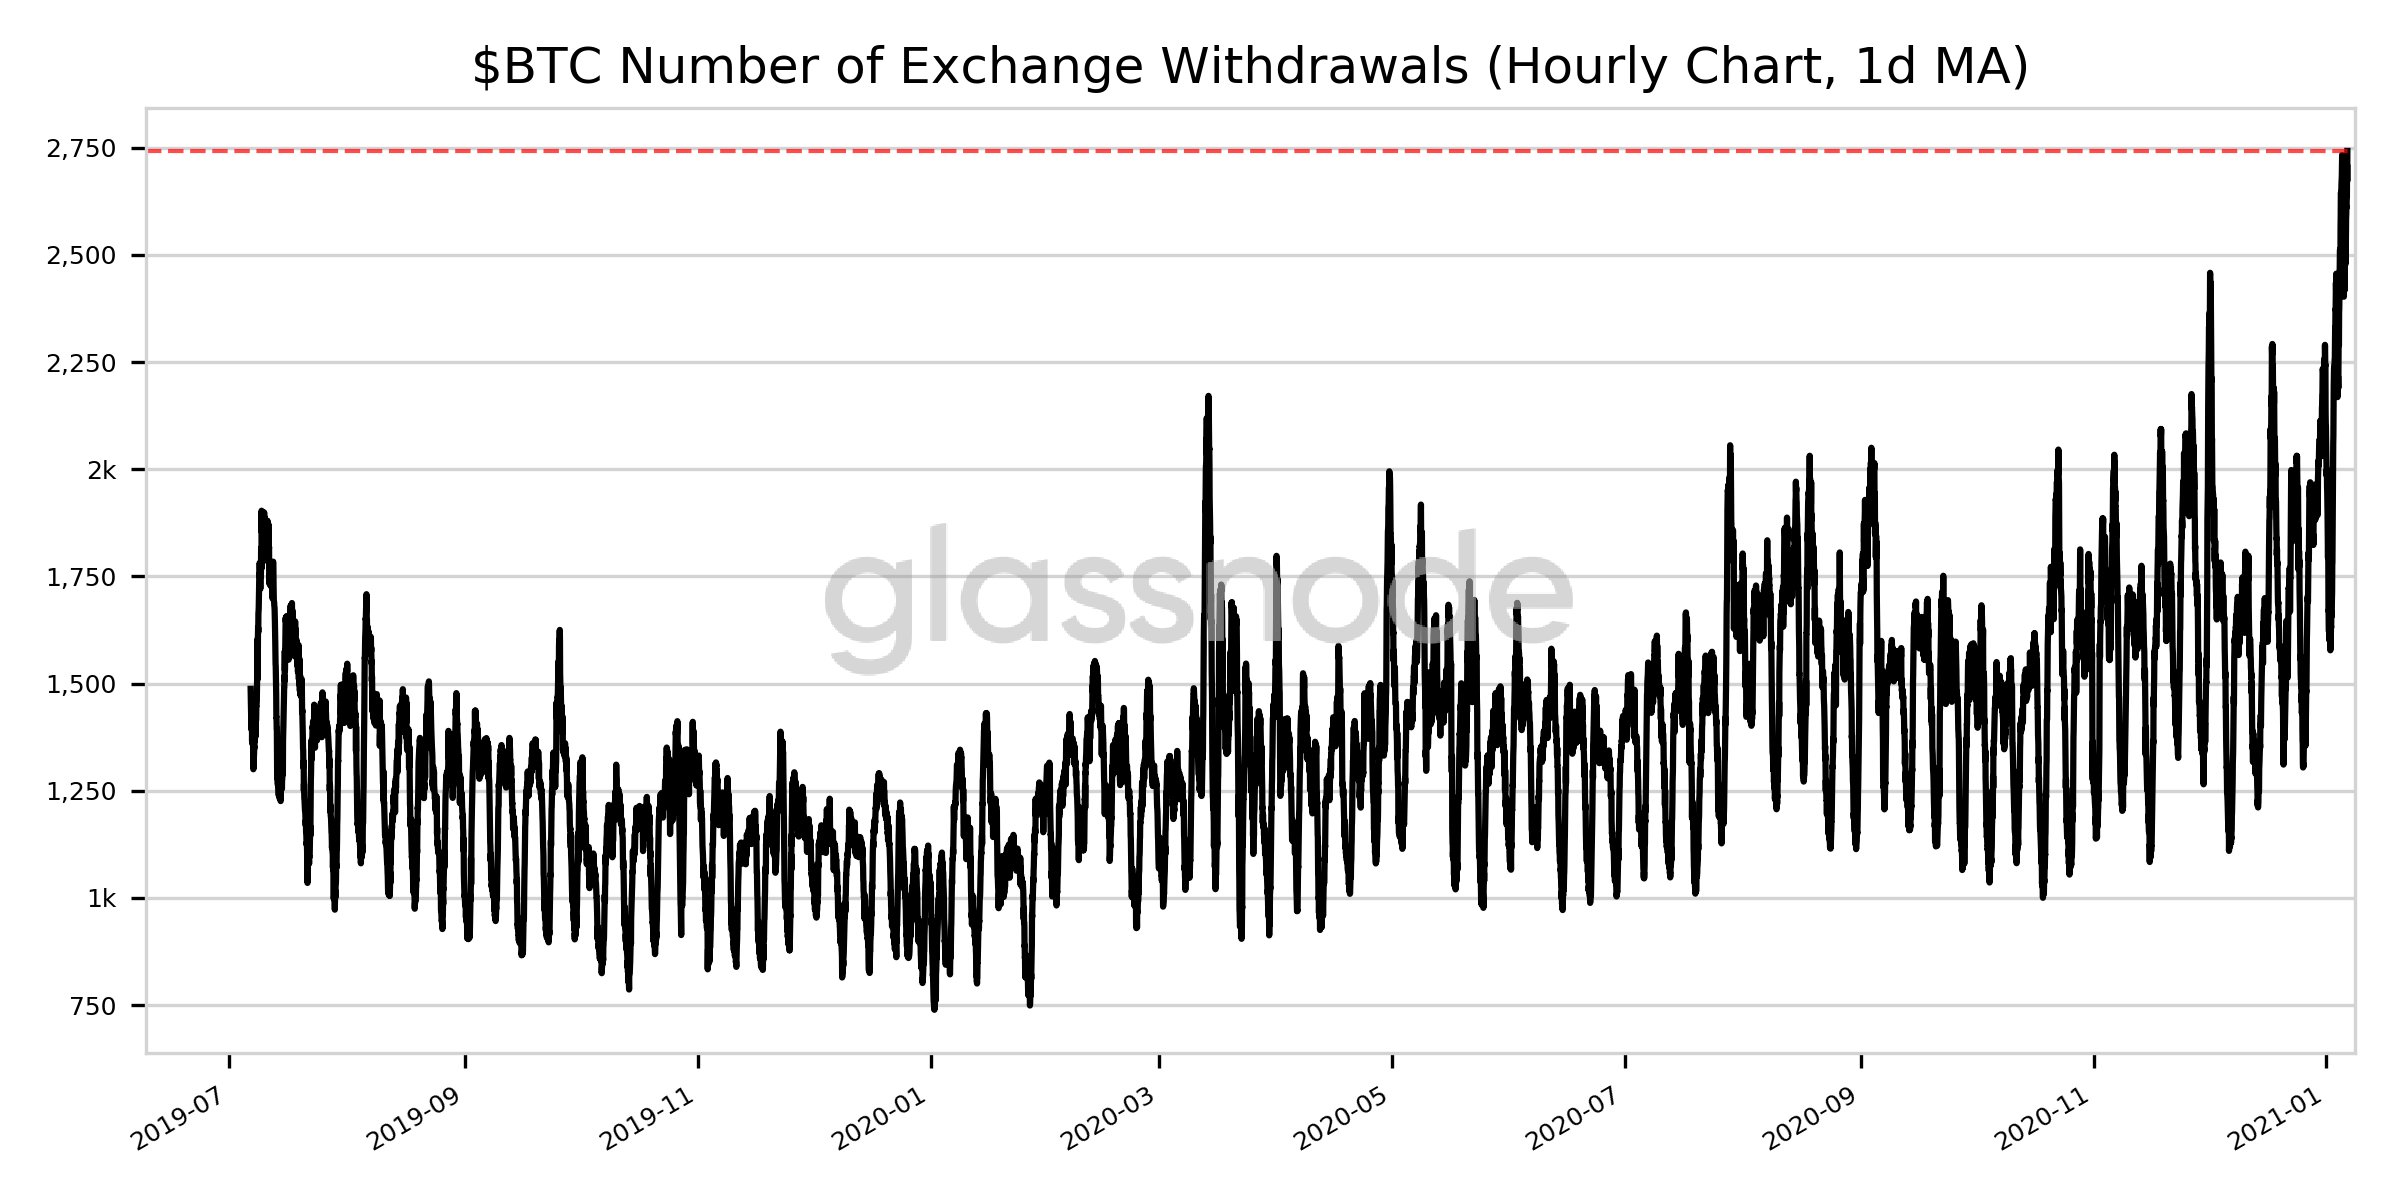 Bitcoin exchange withdrawals hint at the oncoming drop in price?